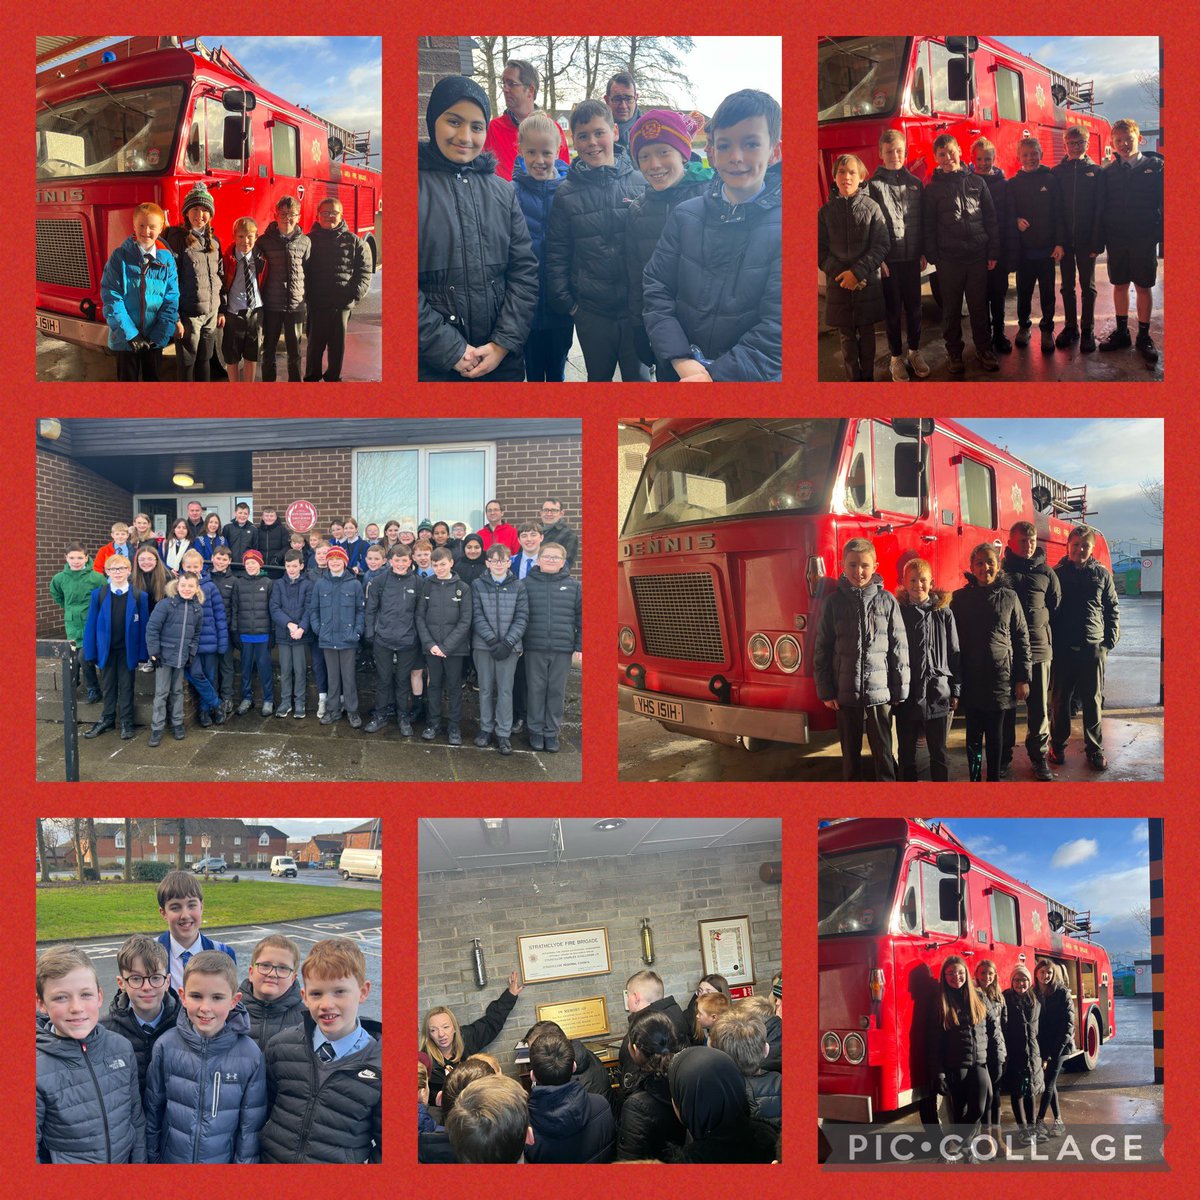 Room 23 with the Forged by Fire team, Community Safety Team from SFRS & Legacy Team consisting of previous Knowetop pupils created banners to honour Joseph Calderwood & Stanley McIntosh. We then visited Motherwell Community Fire Station @BurnsHistory @FireSafety_Lan @DalzielHigh